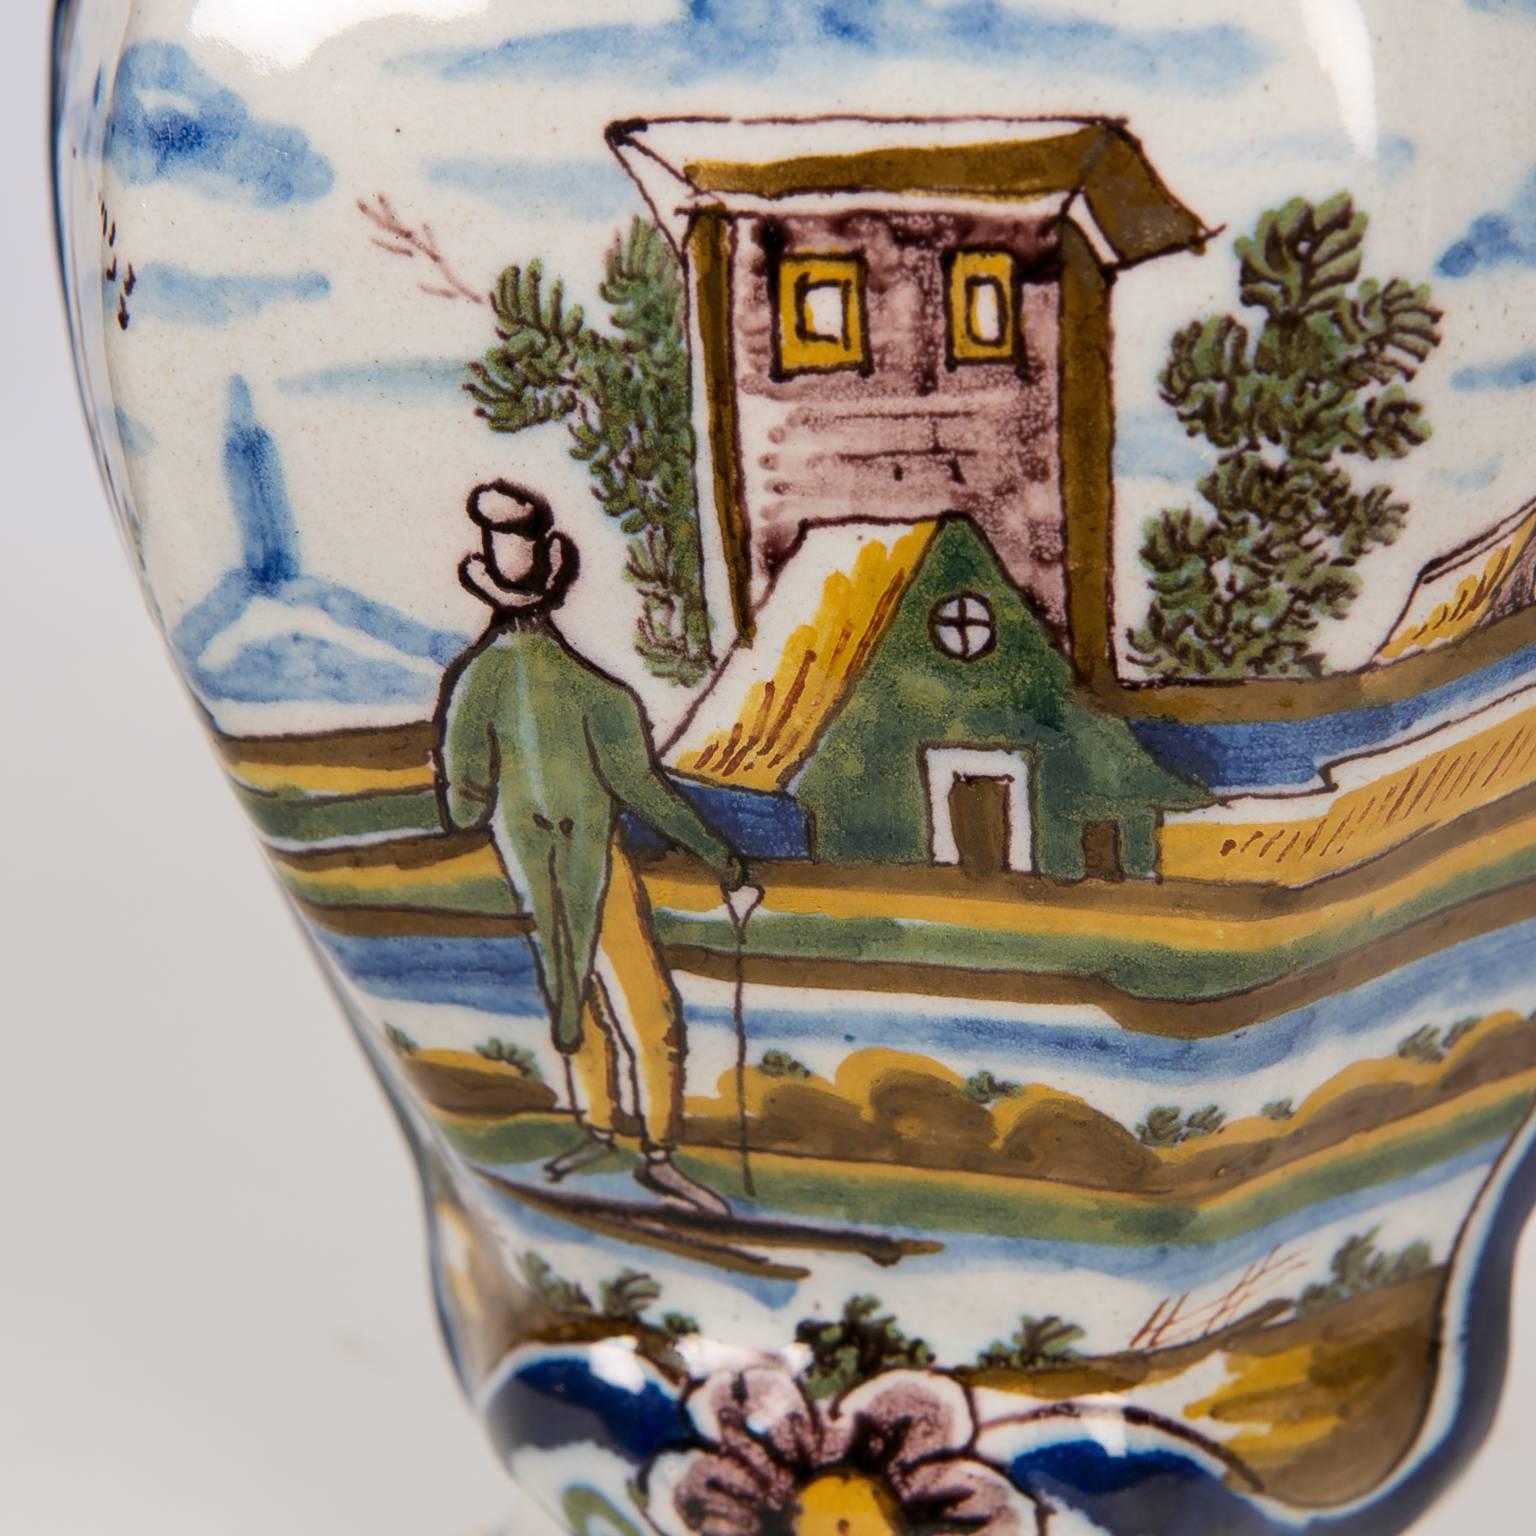 We are pleased to offer this lovely pair of Dutch Delft mantle vases showing a gentleman with a walking stick looking out across a river. 
On the other bank we see colorful houses and a church. The scene is outlined with a traditional dark blue line